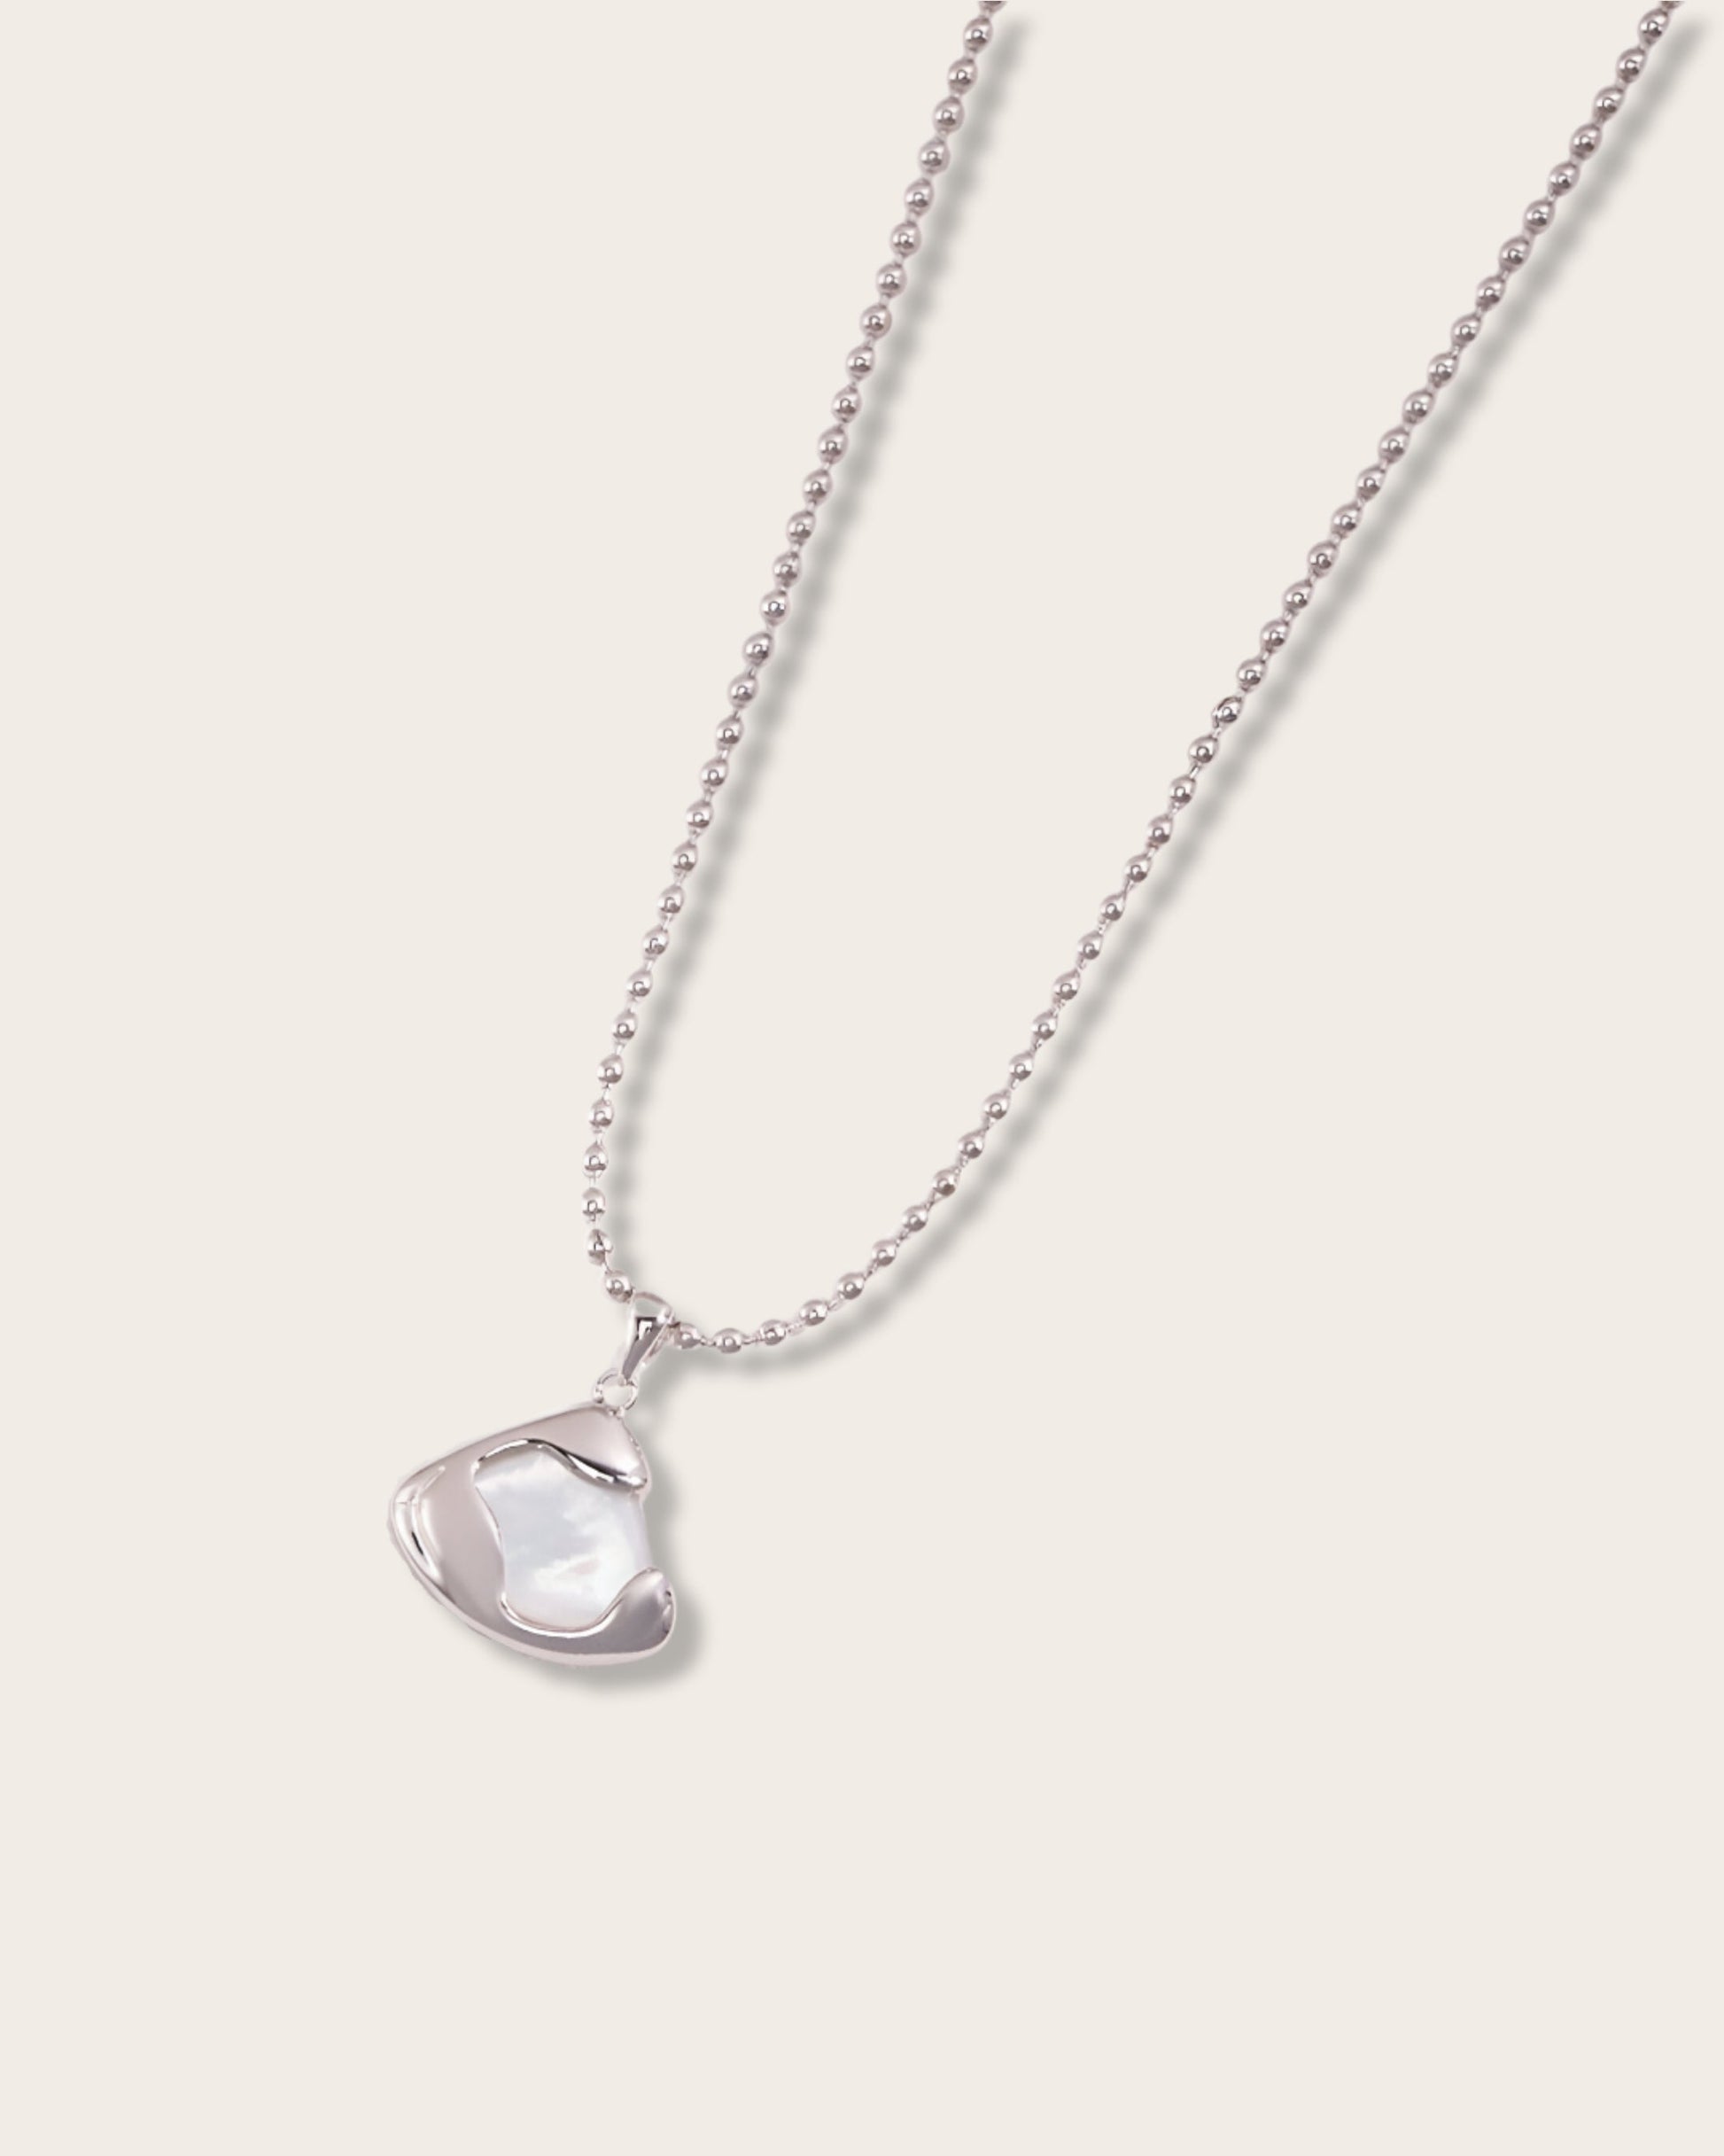 Grace and femininity Necklace embedded with natural pearl -  S925 Sterling Silver with 18K Gold Vermeil - Serene Beauty - delicate design and exquisite craftsmanship, it adds a touch of magic to any outfit.